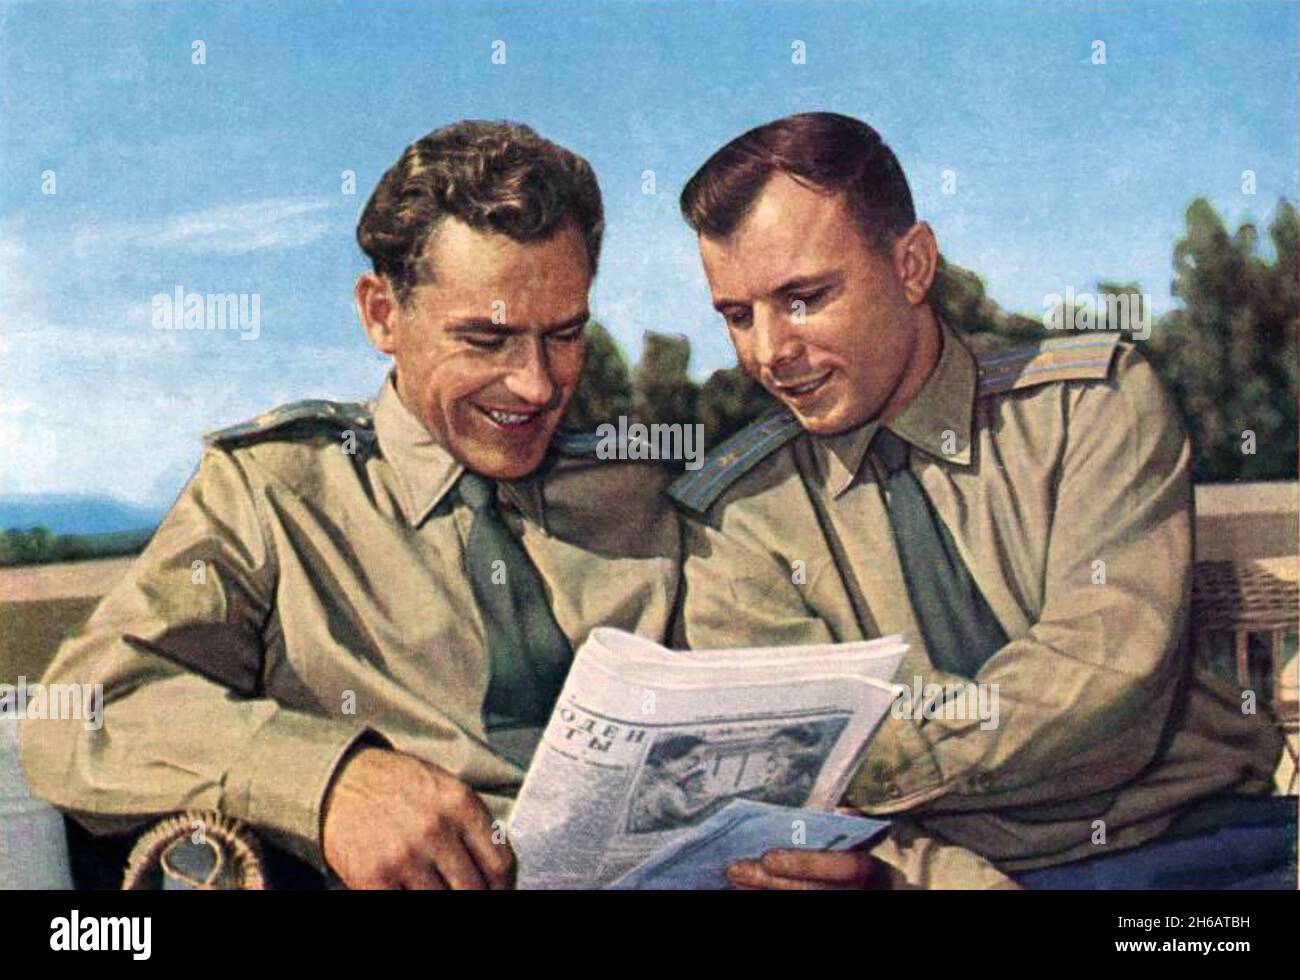 YURI GAGARIN (1934-1988) Soviet astronaut  at right with fellow space pioneer Gherman Titov (1935-2000) in 1961 respectively the pilots of Vostok 1 and Vostok 2. Stock Photo